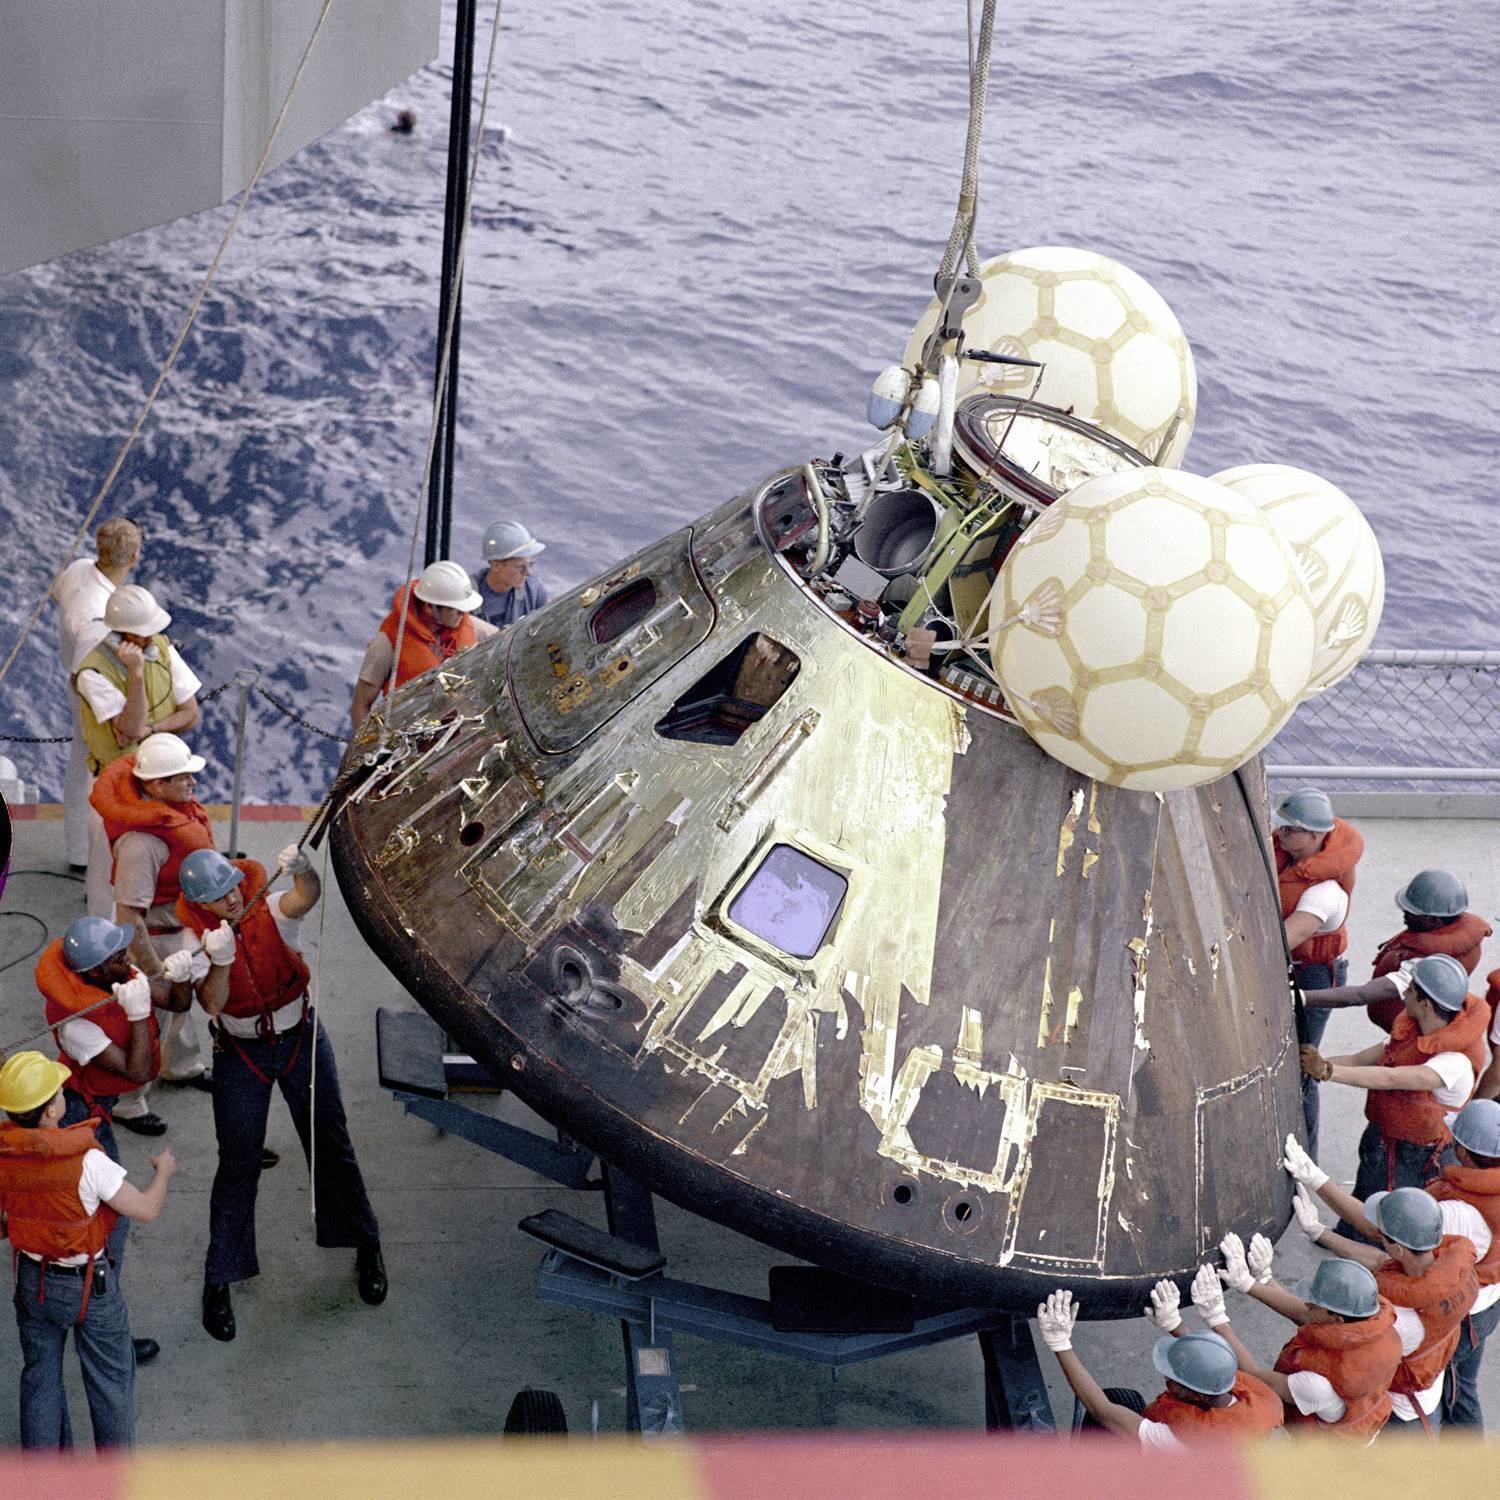 Recovering the Apollo 13 Command Module shortly after its water landing.